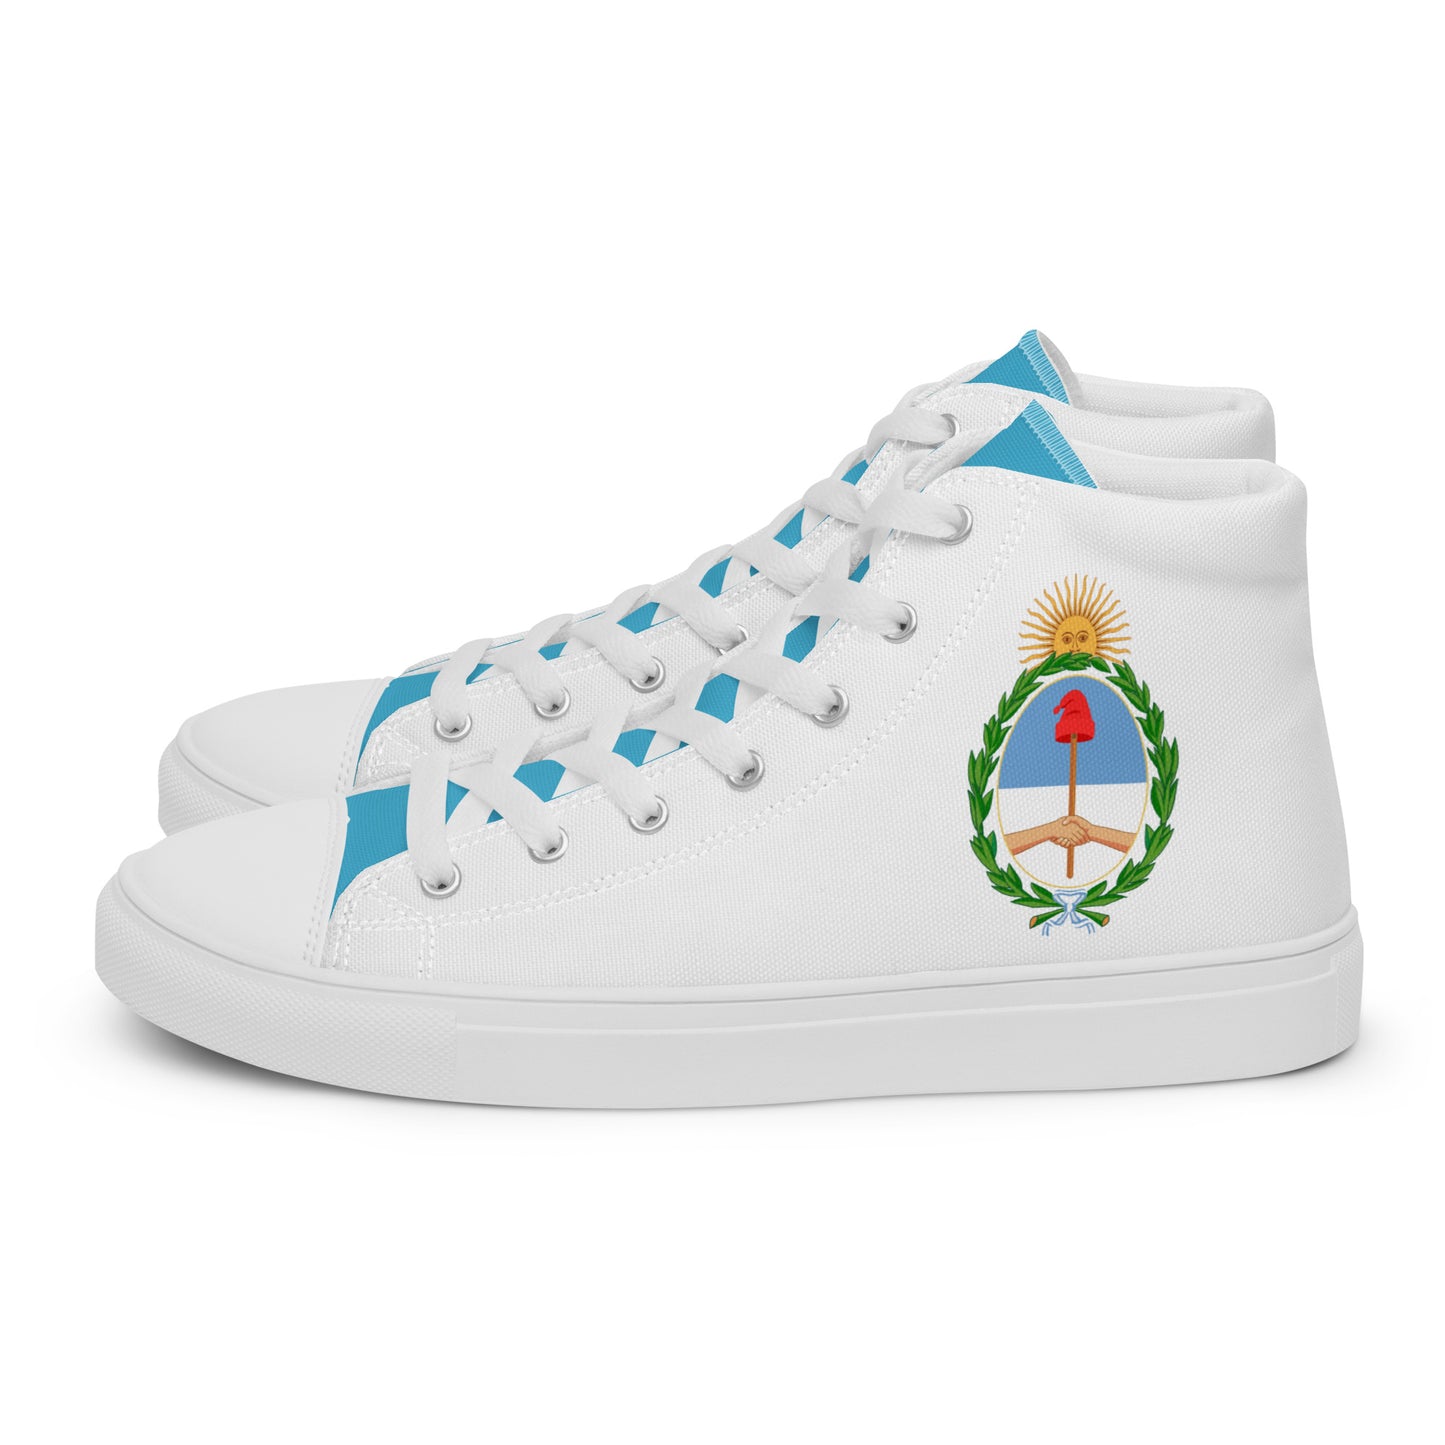 Argentina - Men - White - High top shoes